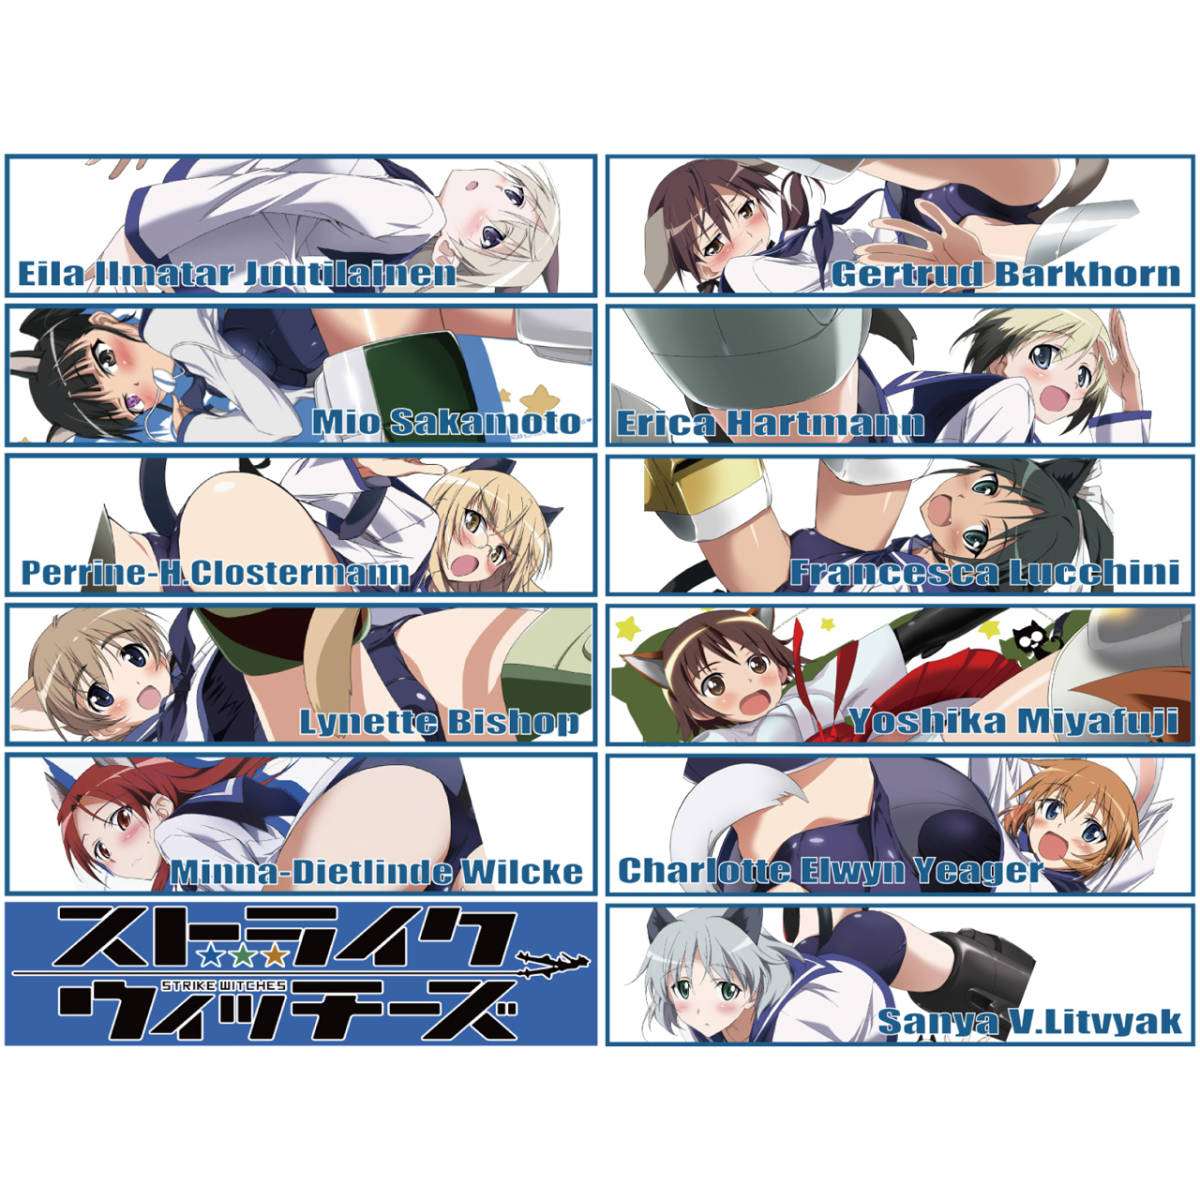  Strike Witches width long all Cara + Logo for automobile powerful magnet (UV* waterproof processing )